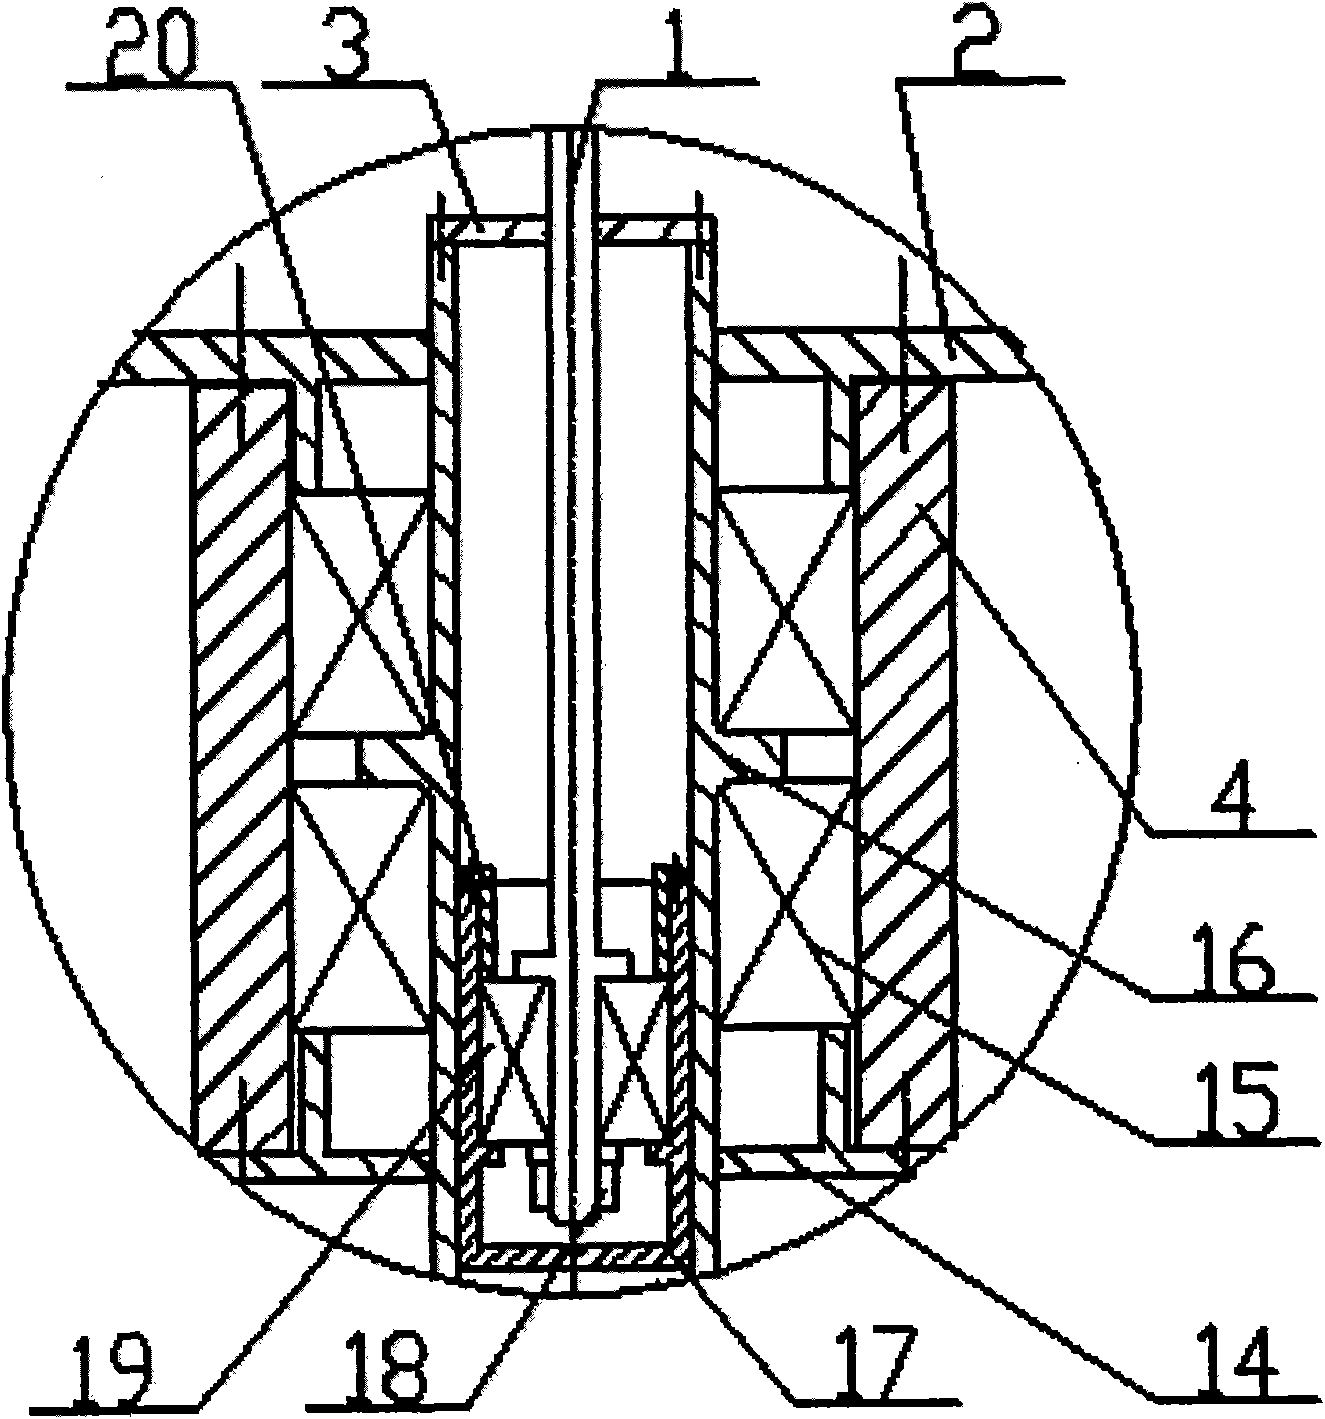 Squid-mantle-like pulse type water-spraying propulsion device